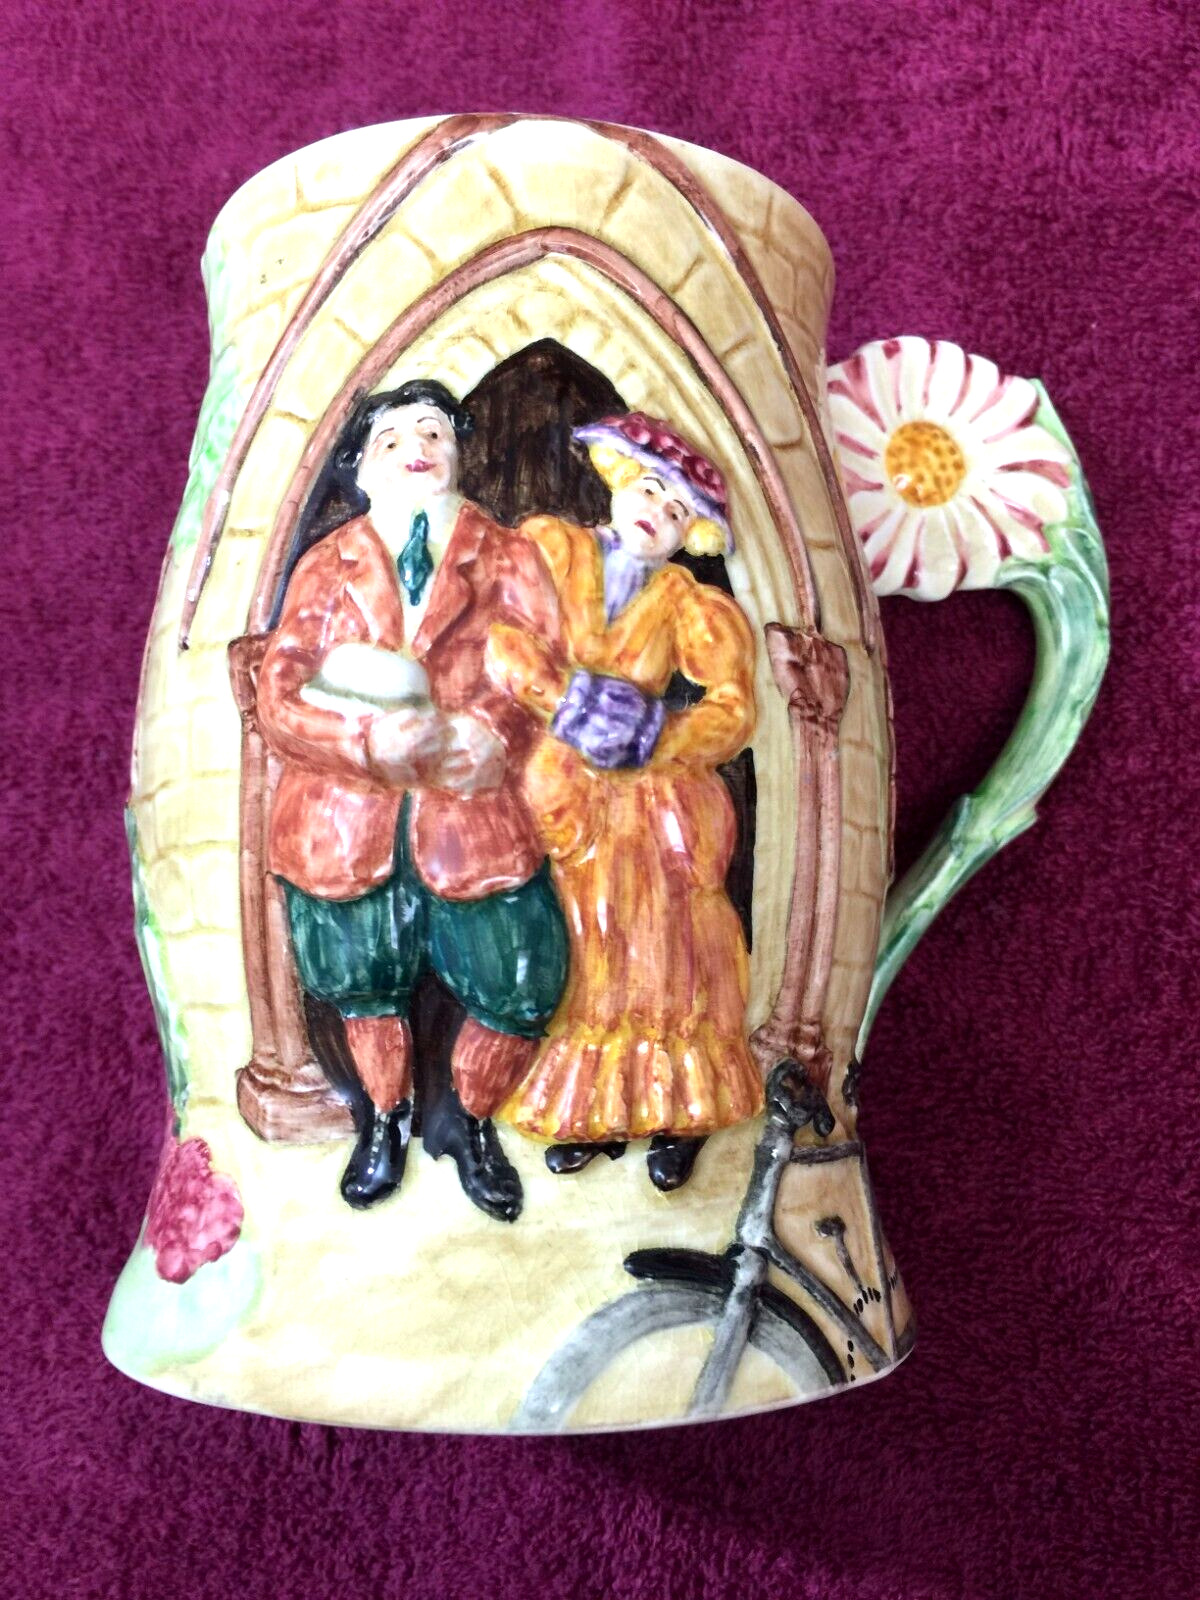 BEER STEIN VINTAGE MADE IN ENGLAND WORKING MUSICAL STEIN 6 x 4.25 x 6.25 INCHES